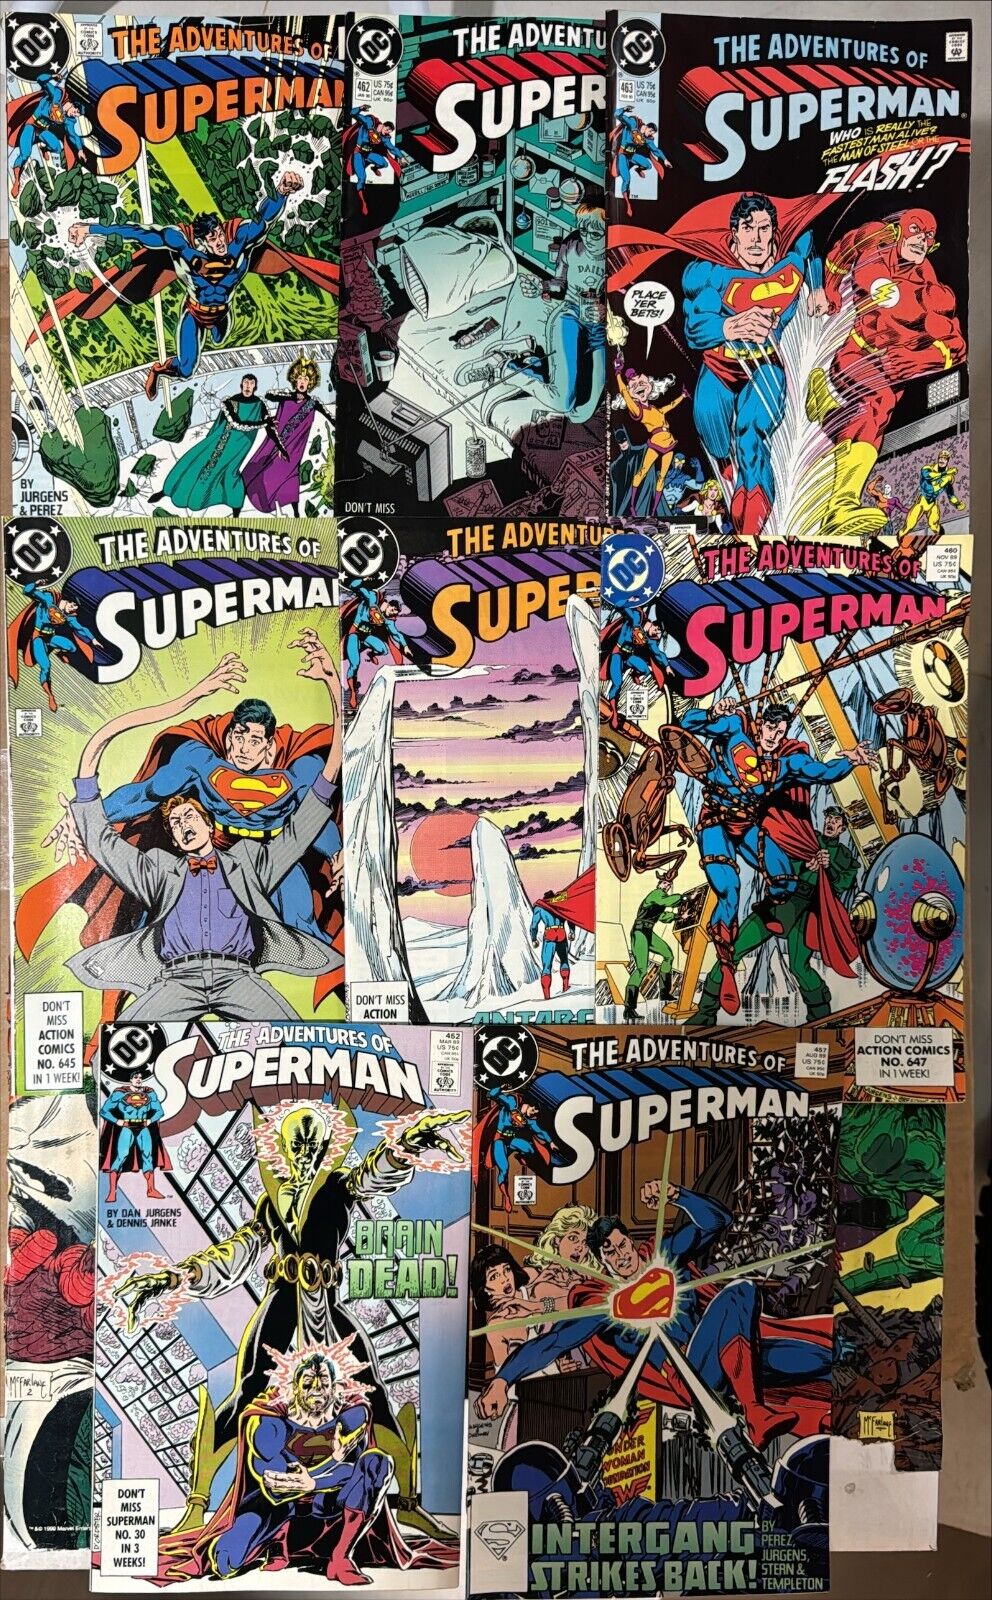 The Adventures Of Superman #452, 457, 458, 459, 460, 461, 462, 463 Lot of 8 DC